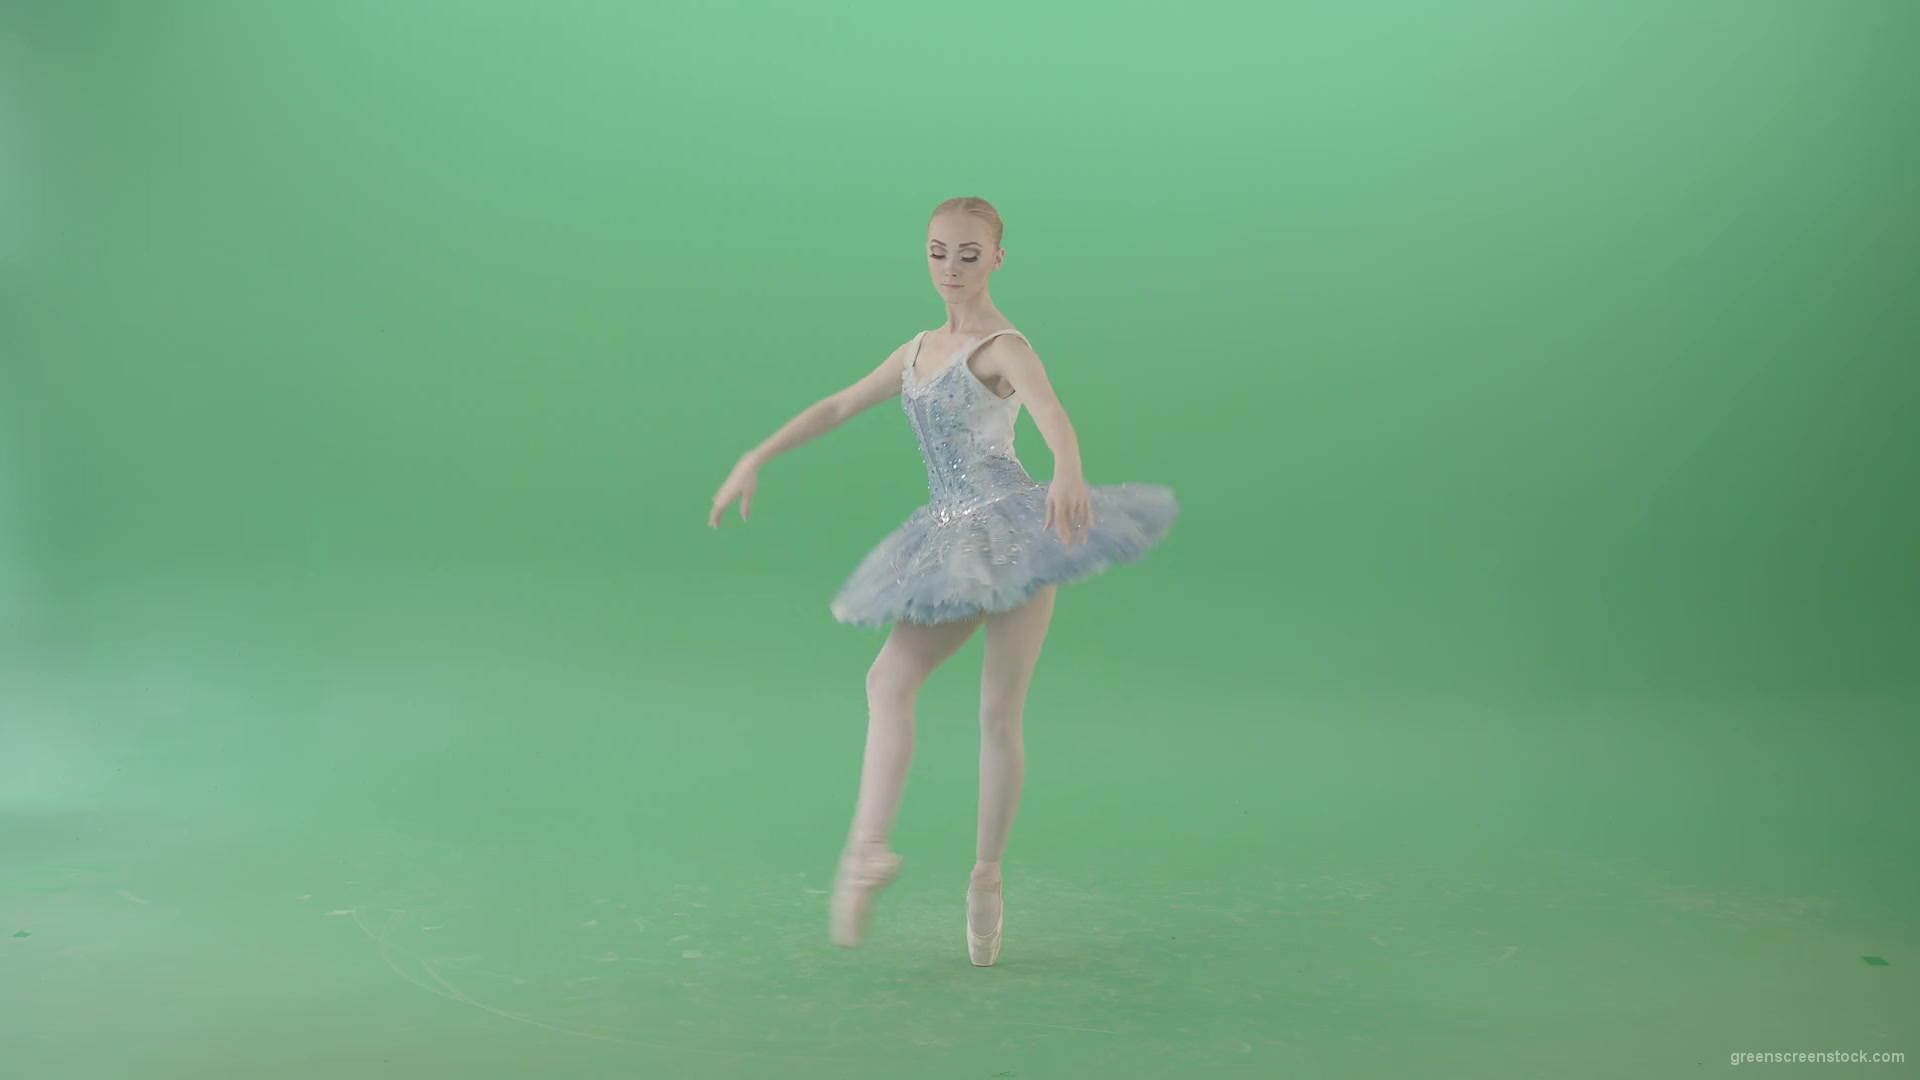 Christmas-story-baller-dancing-girl-in-blue-ballerin-dress-performing-isolated-on-green-screen-4K-Video-Footage-1920_006 Green Screen Stock